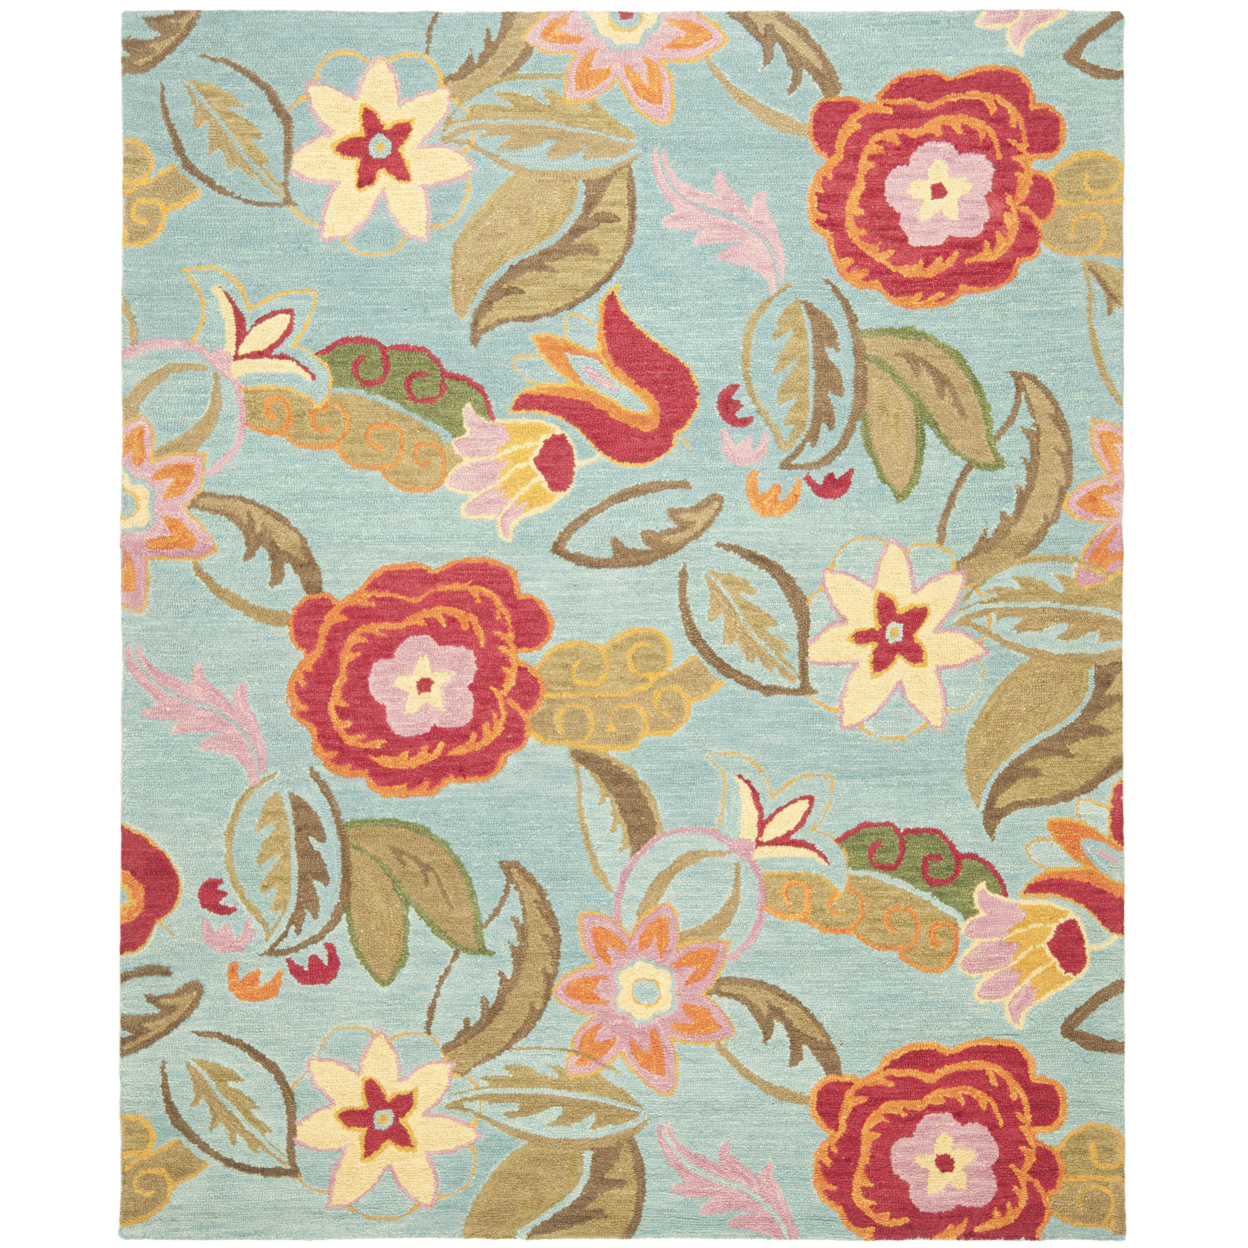 SAFAVIEH Blossom BLM675A Hand-hooked Blue / Multi Rug - 8' 9 X 12'